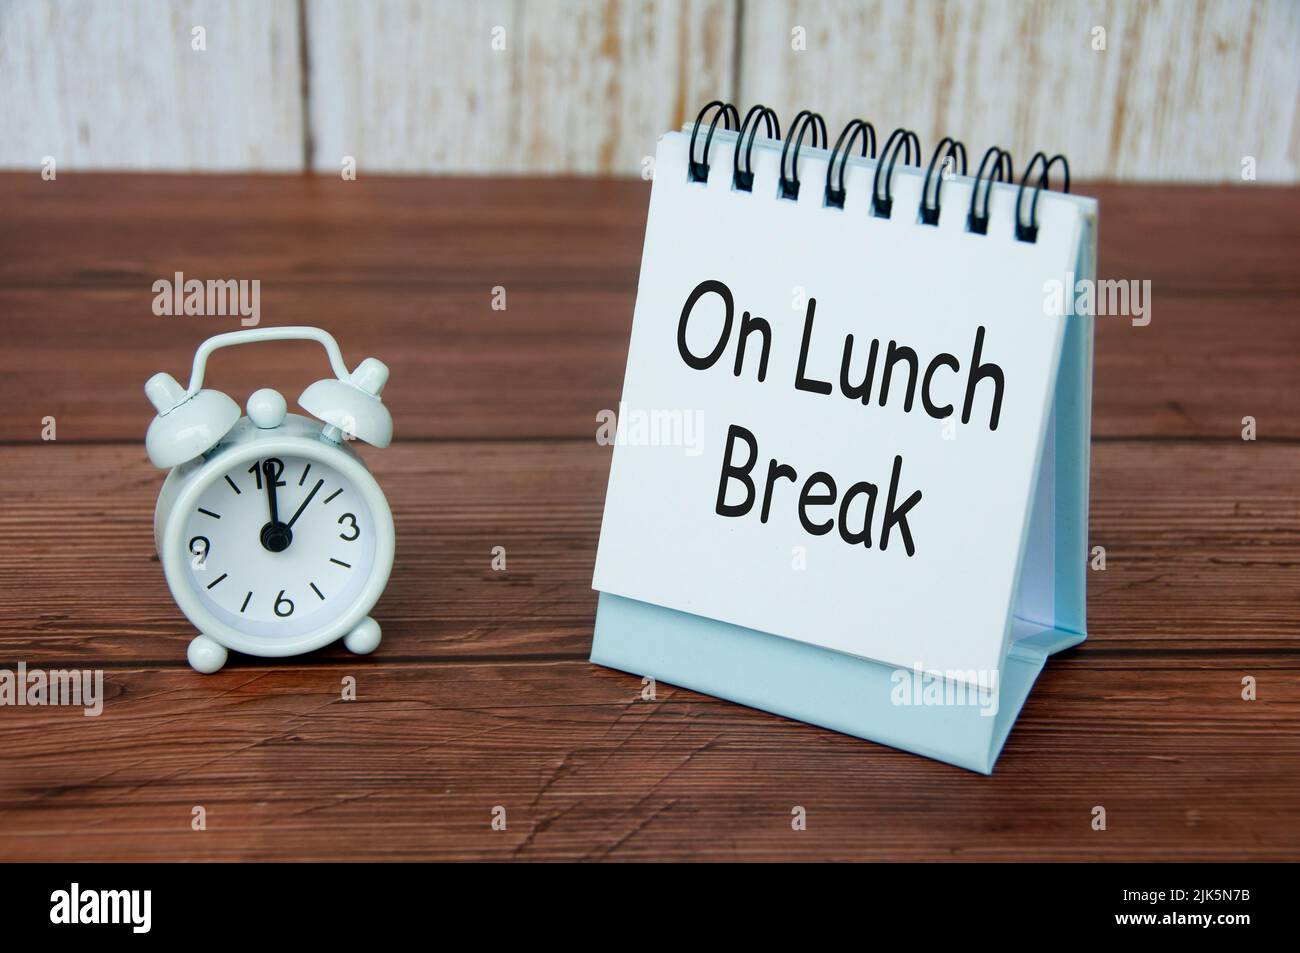 On lunch break text on white table calendar with alarm clock pointing at 12pm. Office concept Stock Photo